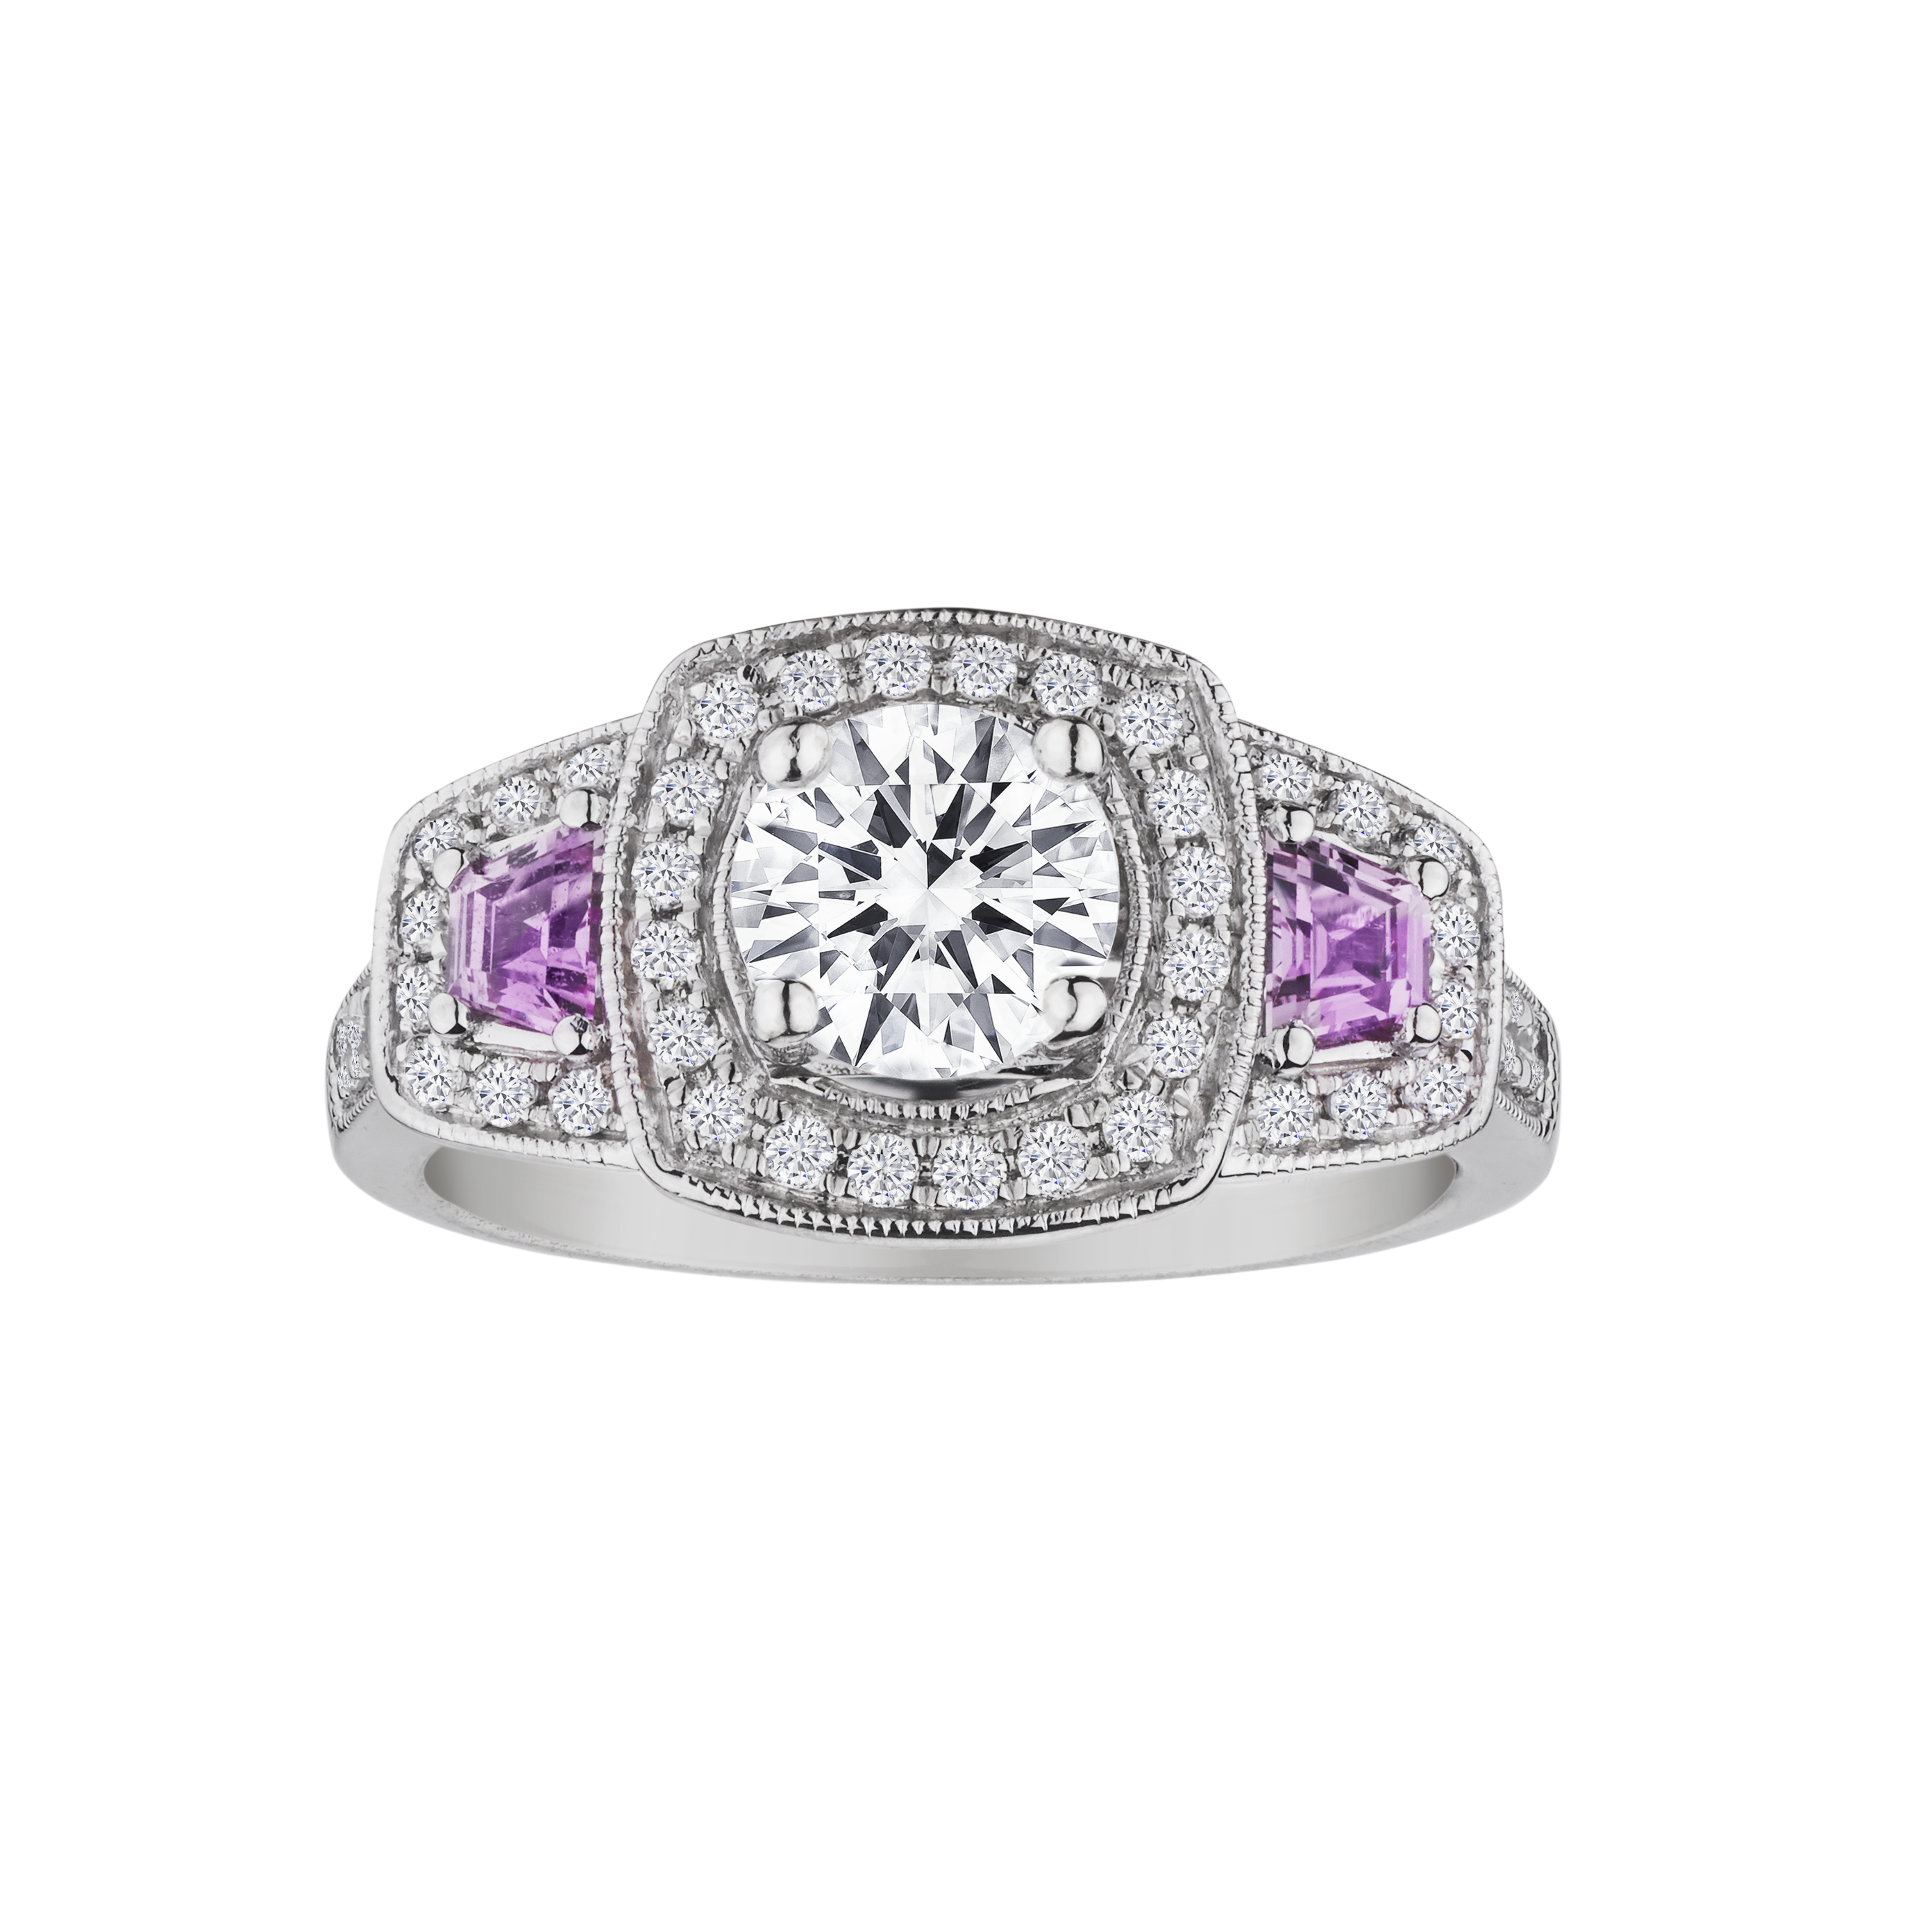 1.80 Carat of Genuine Moissanite, Pink Sapphire and Diamonds "Past, Present, Future" Ring, 14kt White Gold….....................NOW